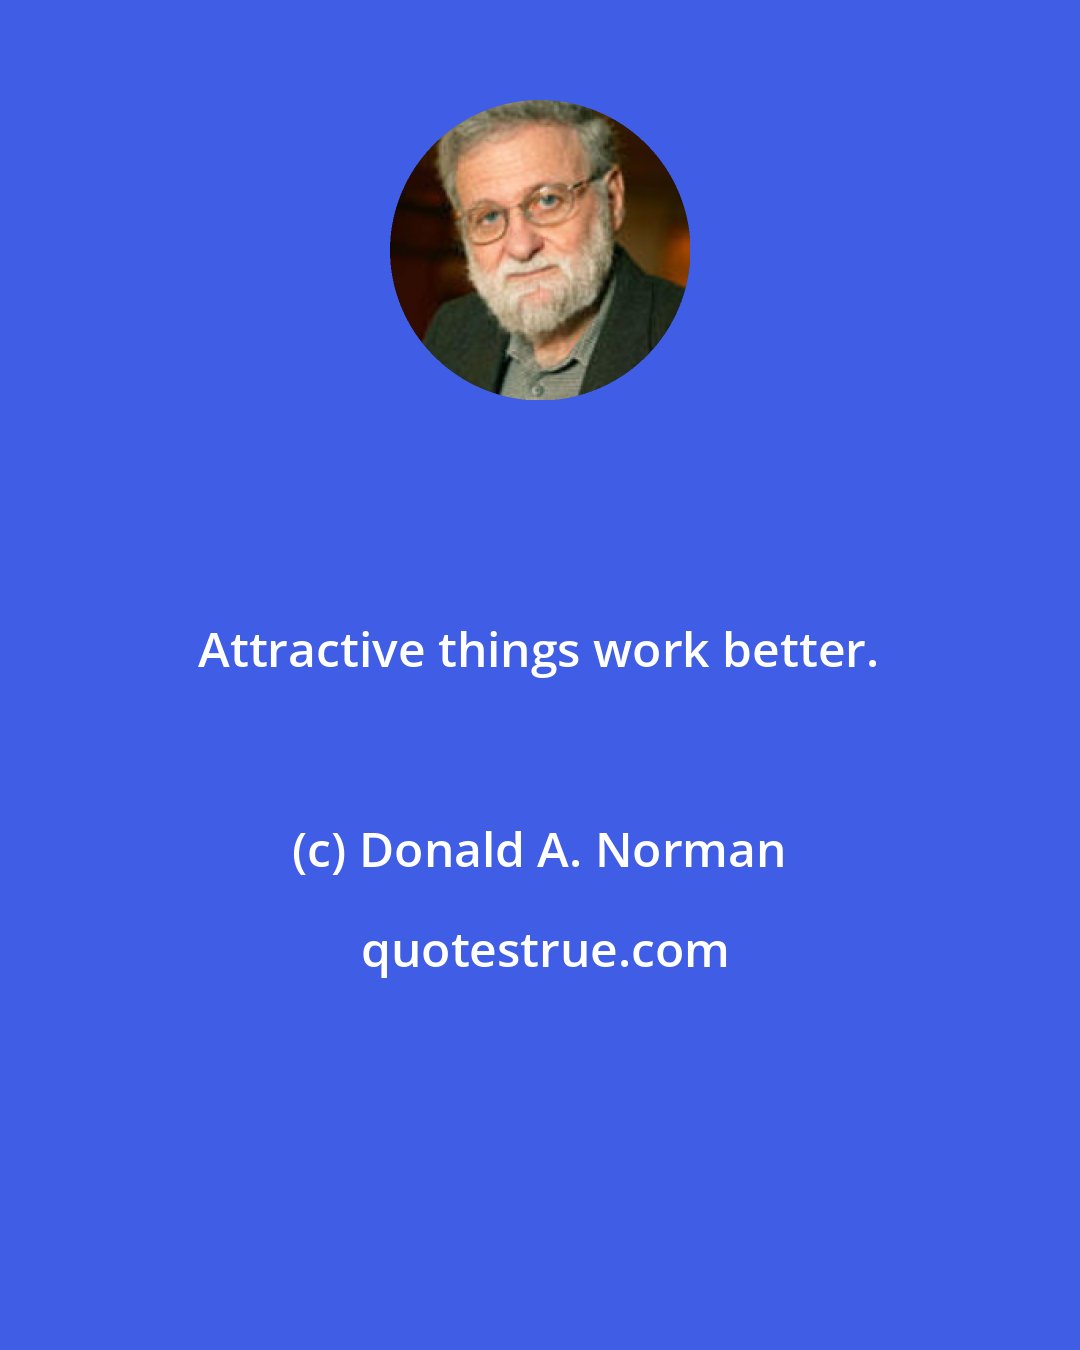 Donald A. Norman: Attractive things work better.